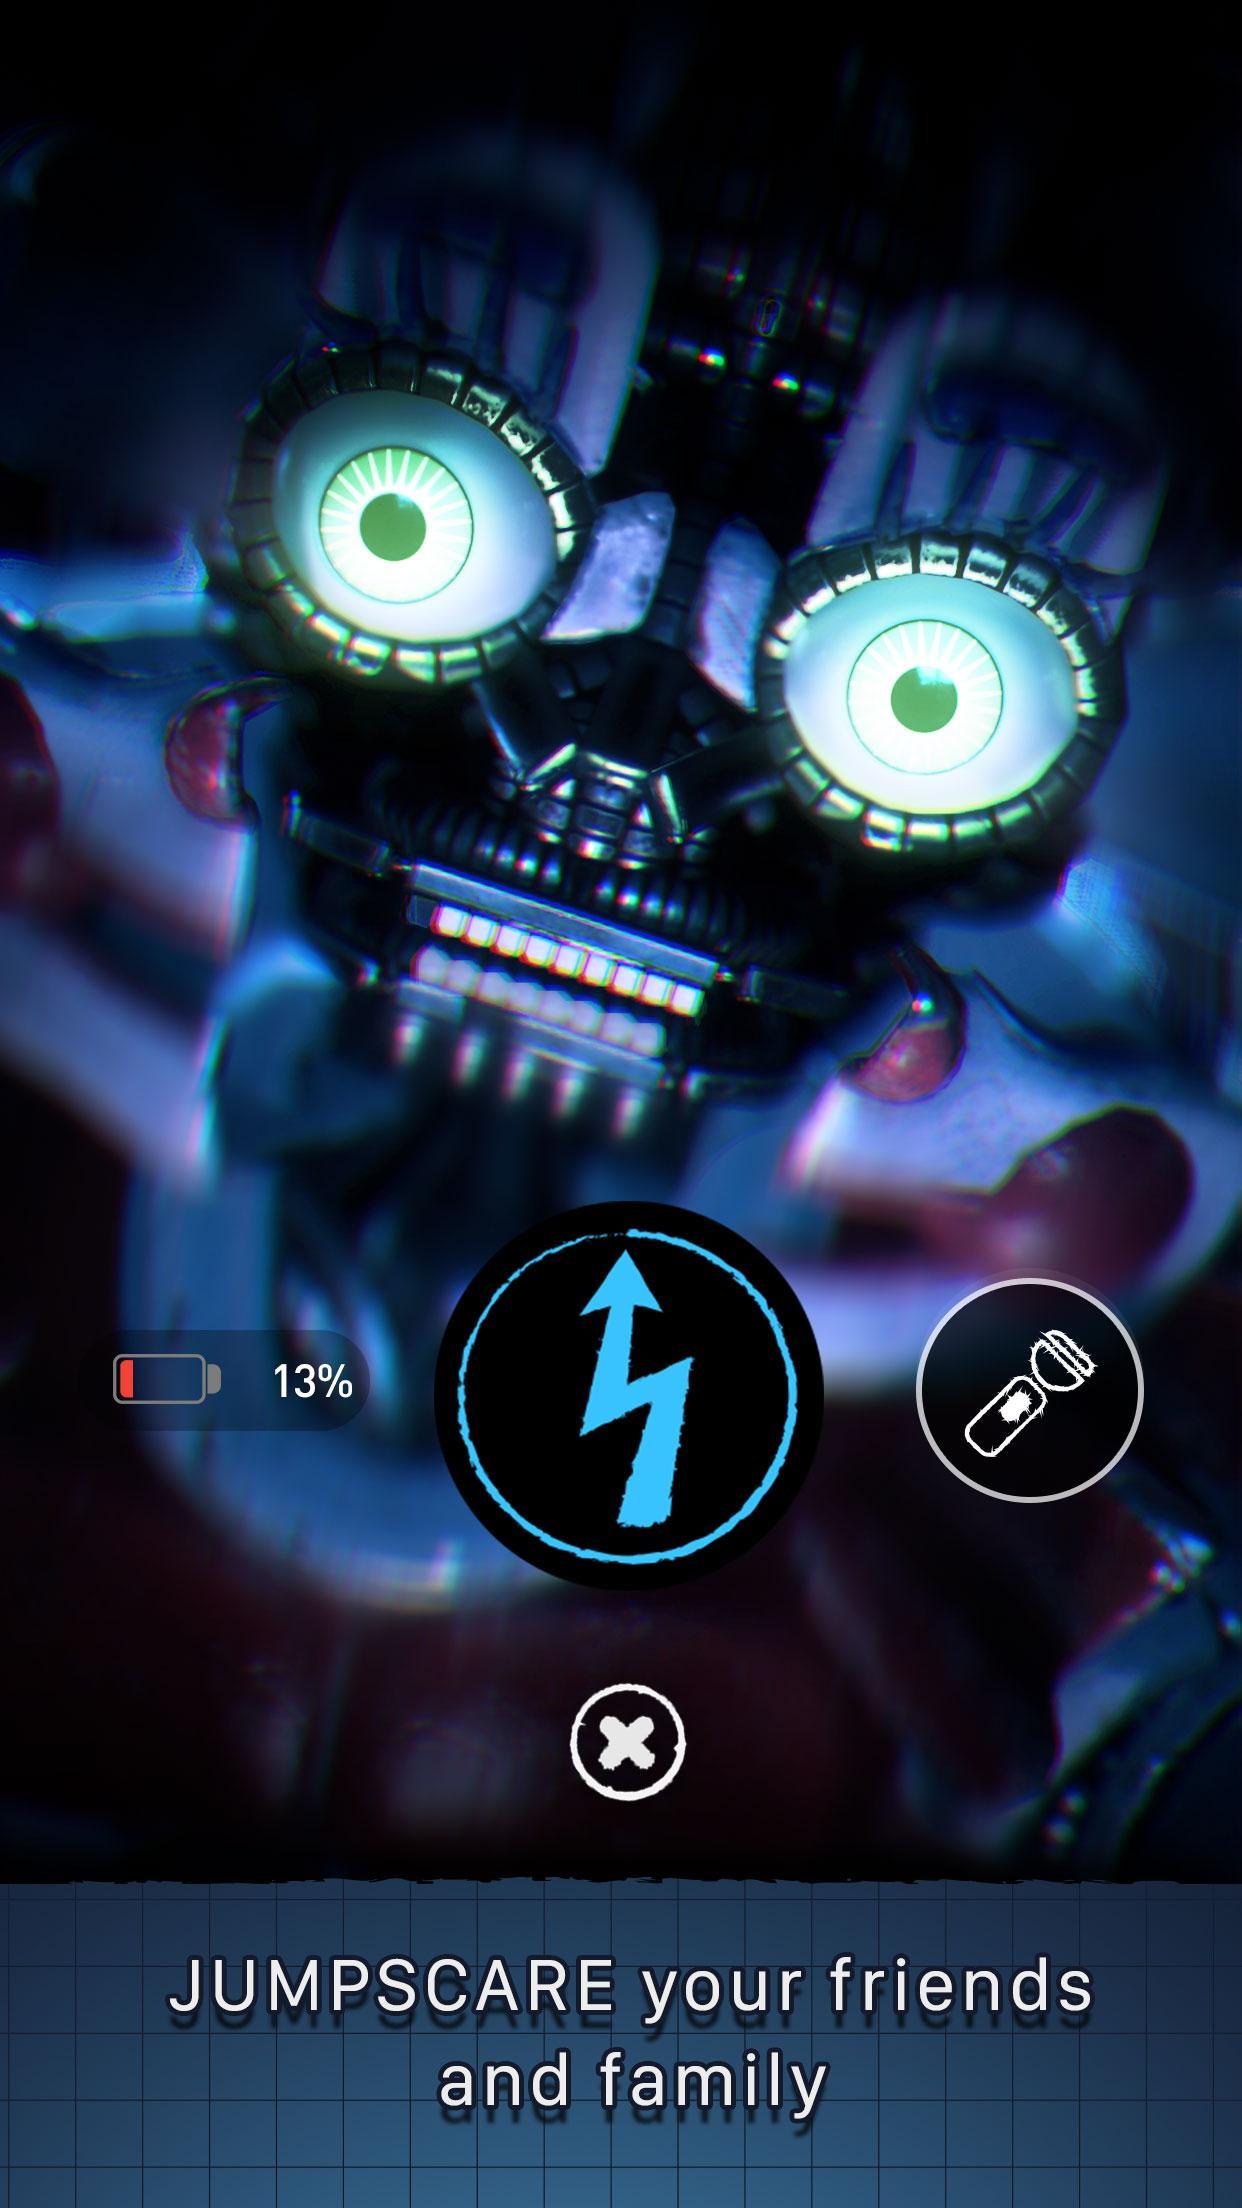 Five Nights at Freddy's AR: Special Delivery 11.0.0 APK Download by Illumix  Inc. - APKMirror